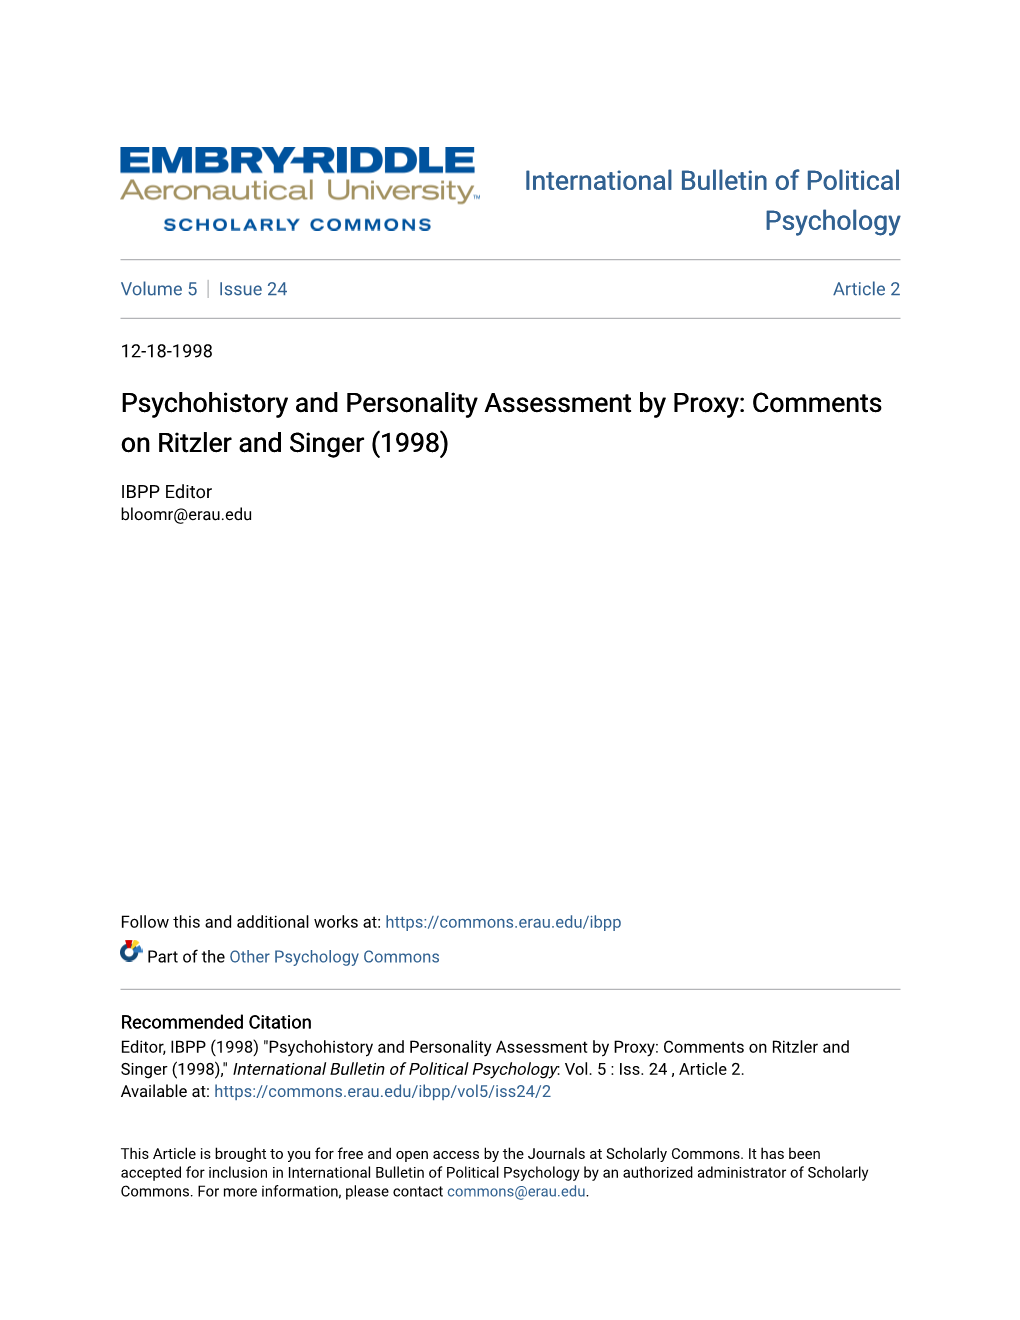 Psychohistory and Personality Assessment by Proxy: Comments on Ritzler and Singer (1998)